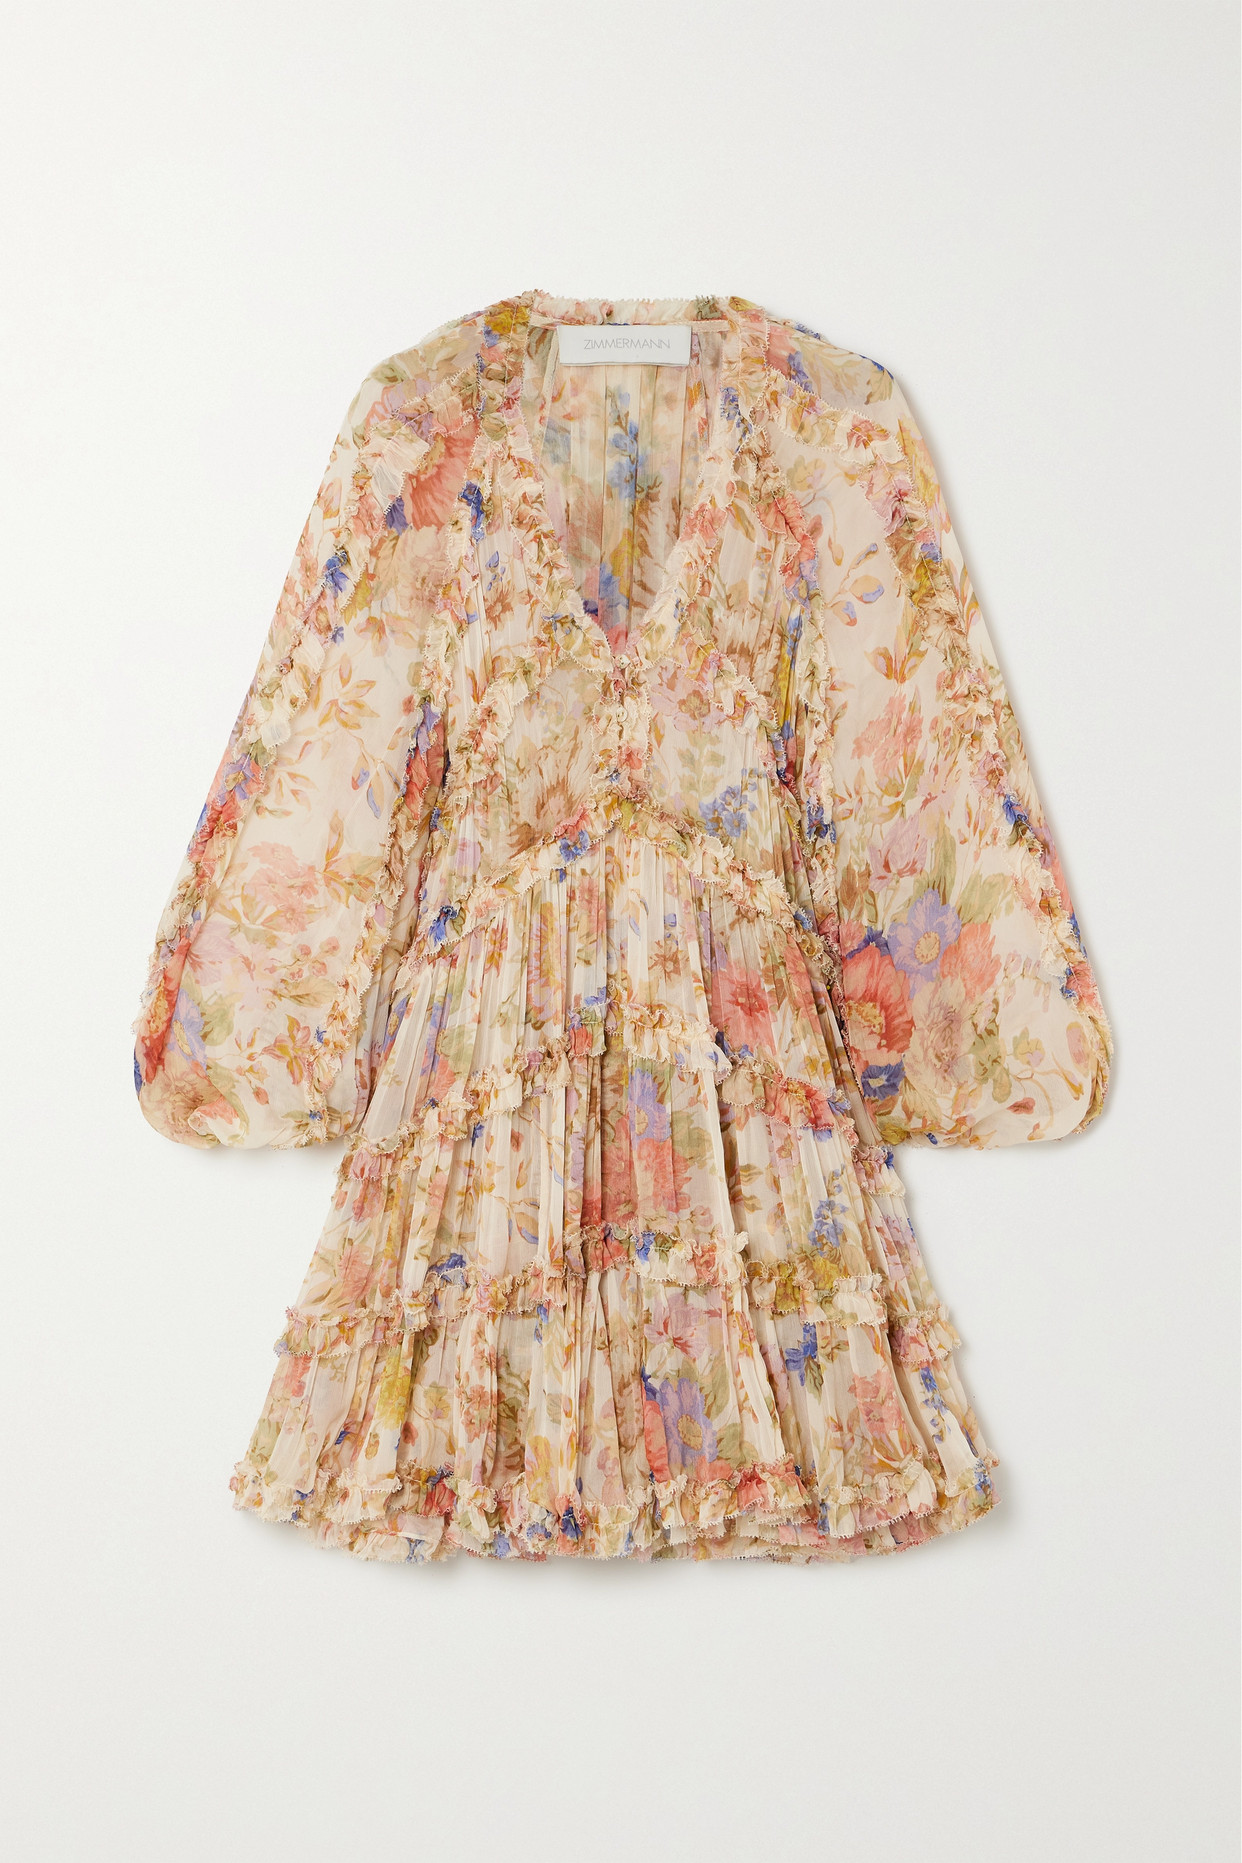 + Net Sustain August Ruffled Tiered Gathered Floral-Print Crepon Mini Dress